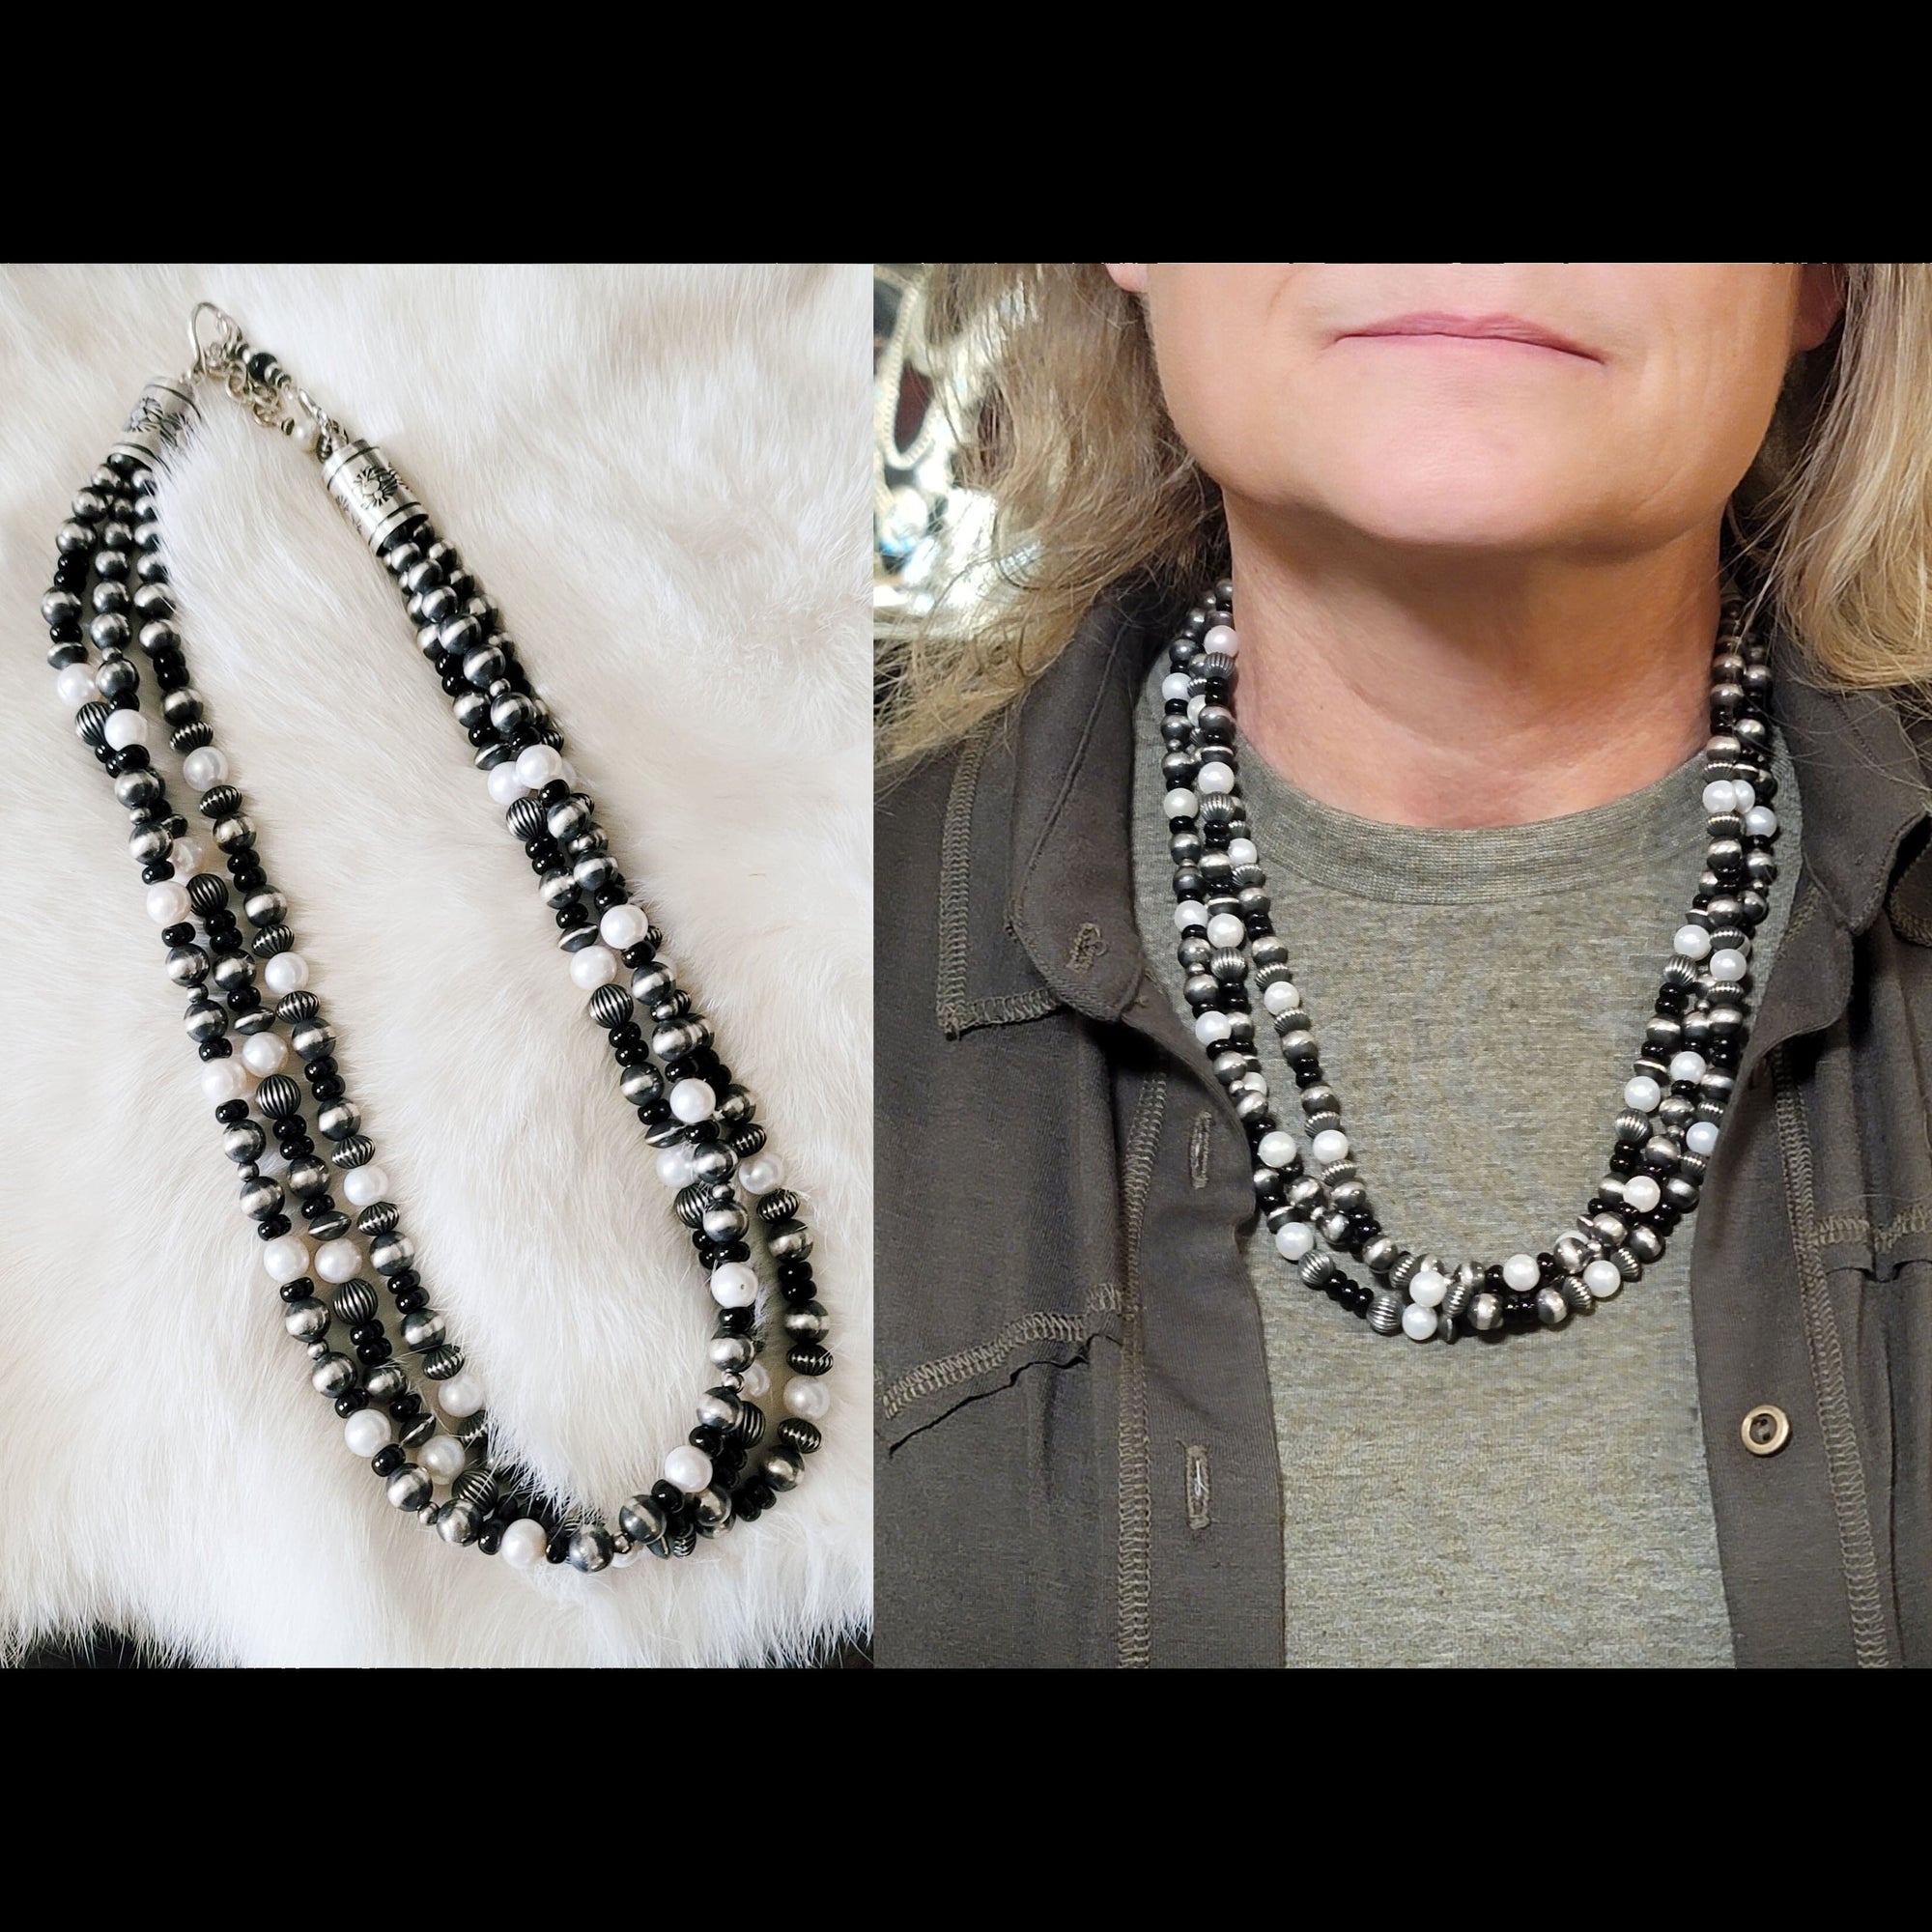 Pearl and Onyx Necklace, Black & White Stunner!